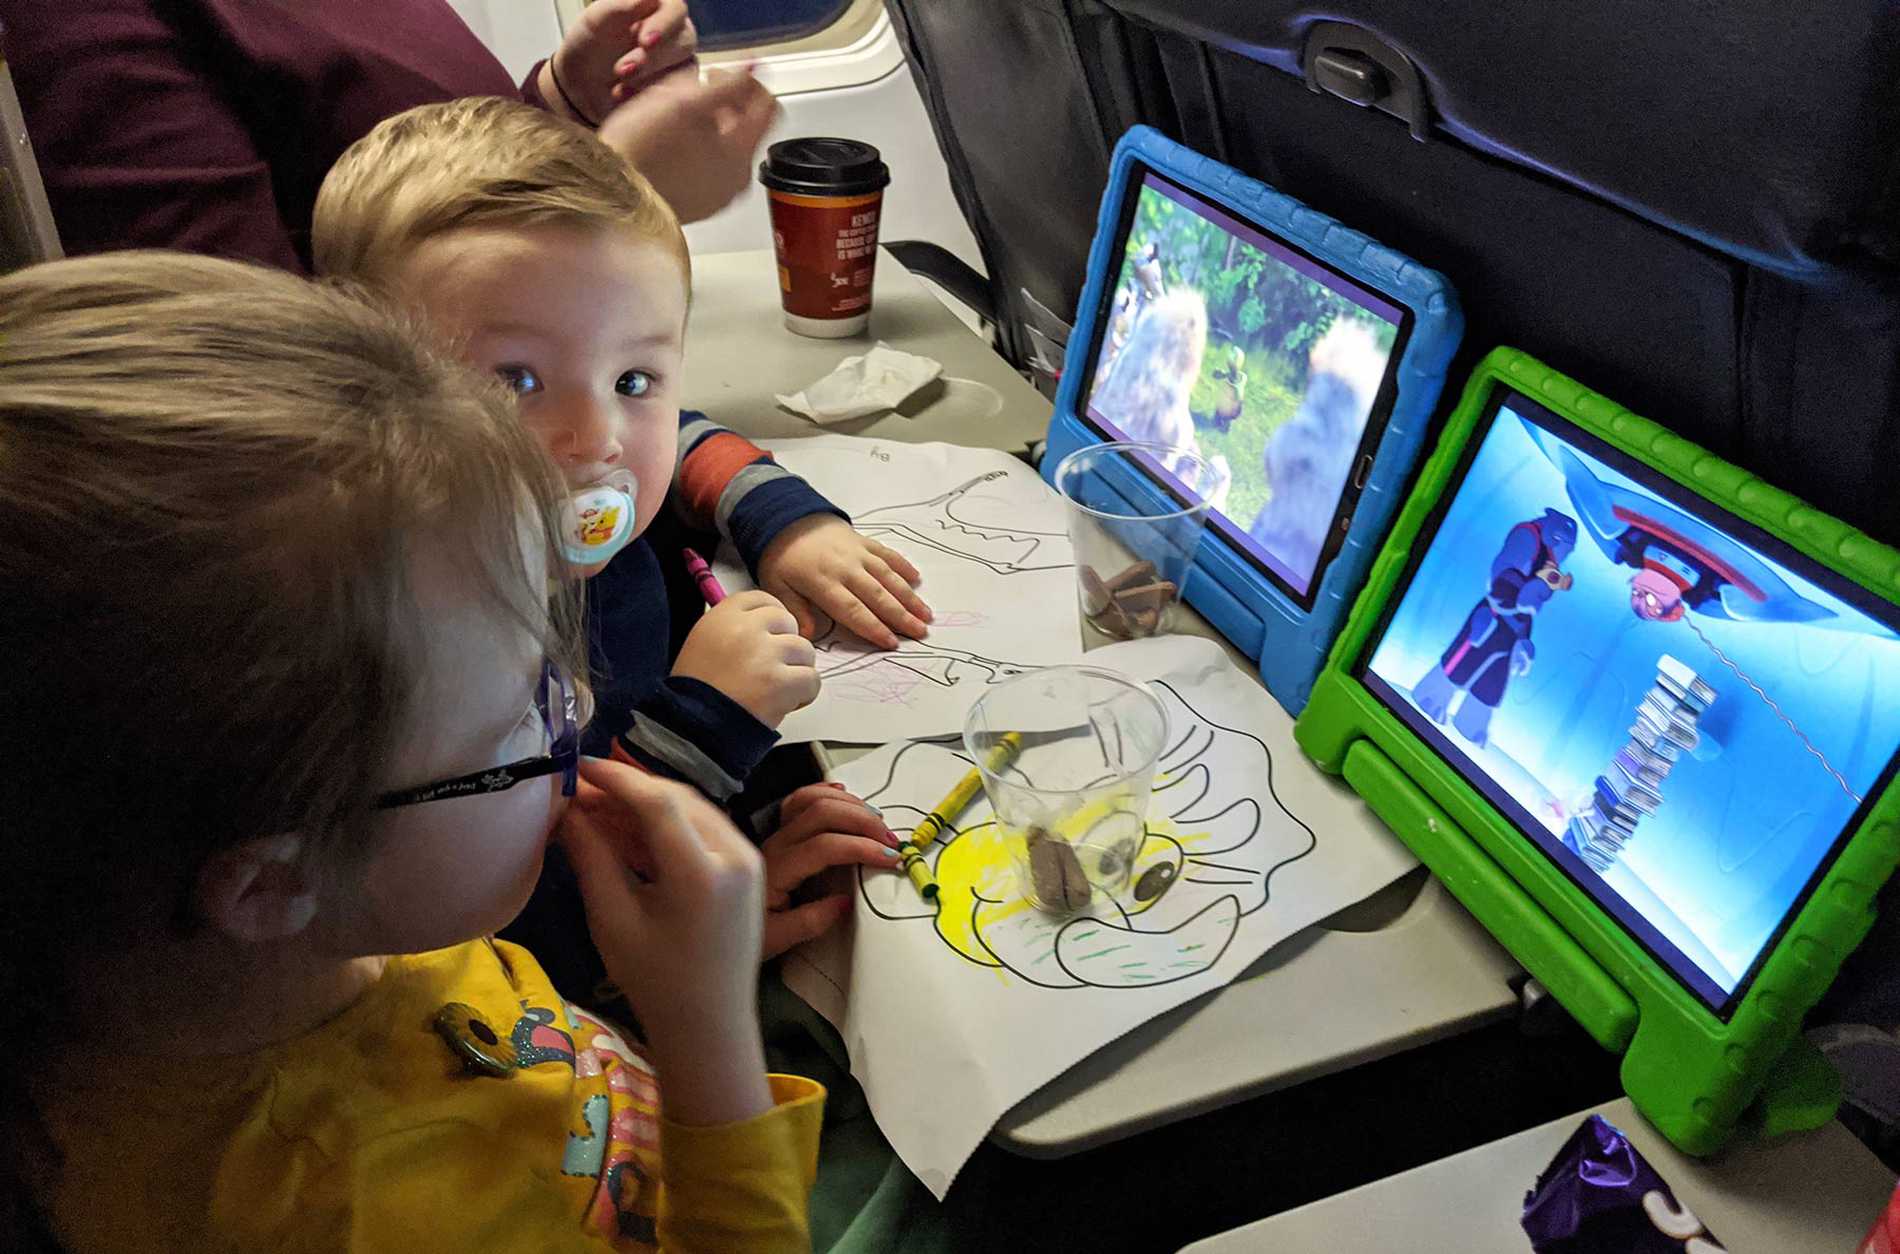 Hope and her brother watching videos on the plane, en-route to Lanzarote.